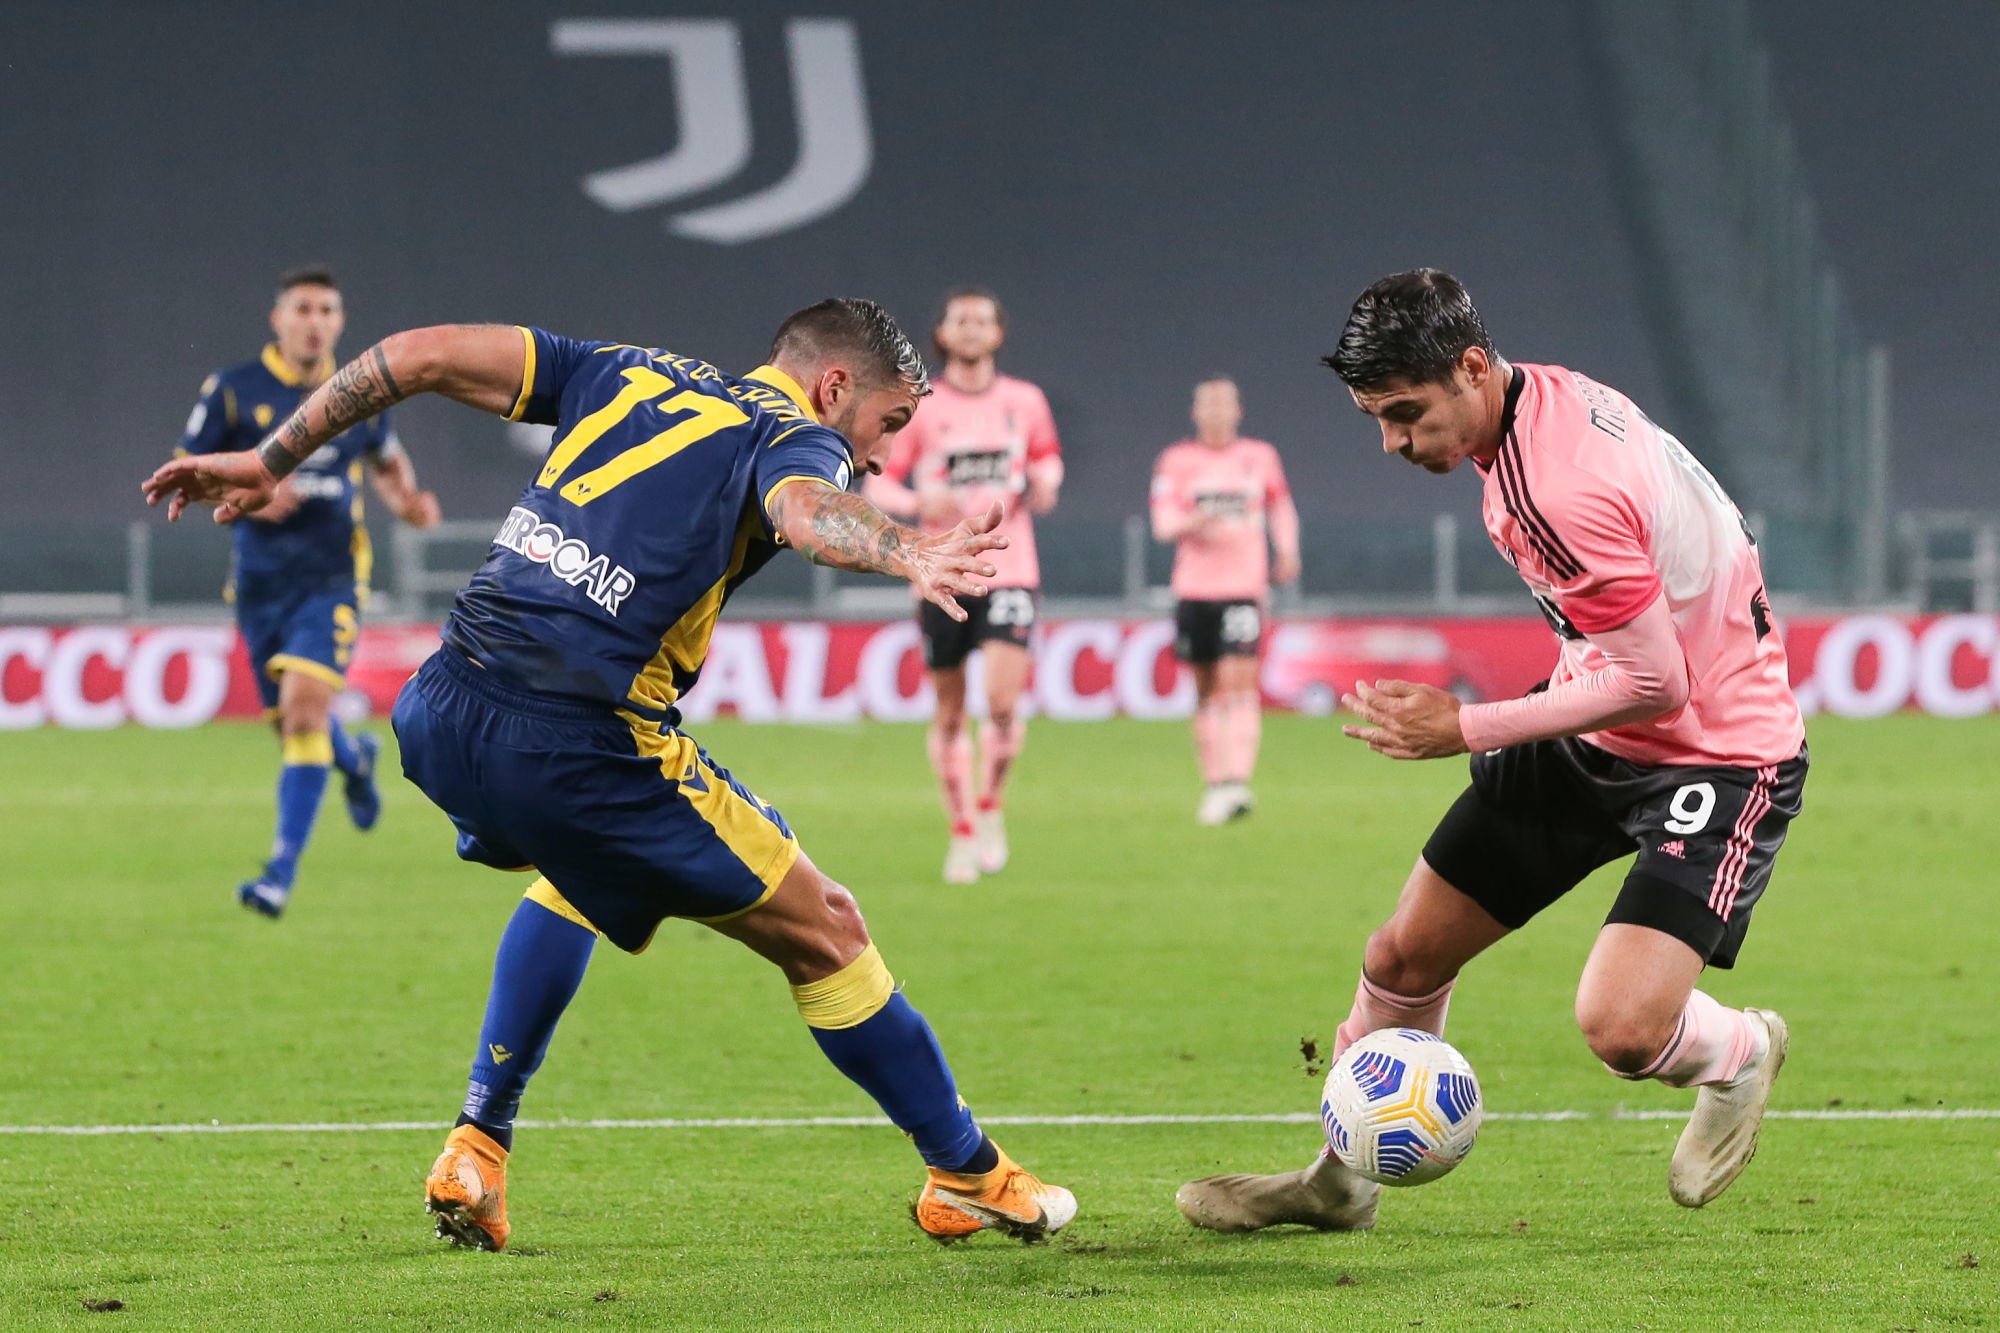 Alvaro Morata of Juventus takes on Federico Ceccherini of Hellas Verona during the Serie A match at Allianz Stadium, Turin. Picture date: 25th October 2020. Picture credit should read: Jonathan Moscrop/Sportimage 
By Icon Sport - Allianz Stadium - Turin (Italie)